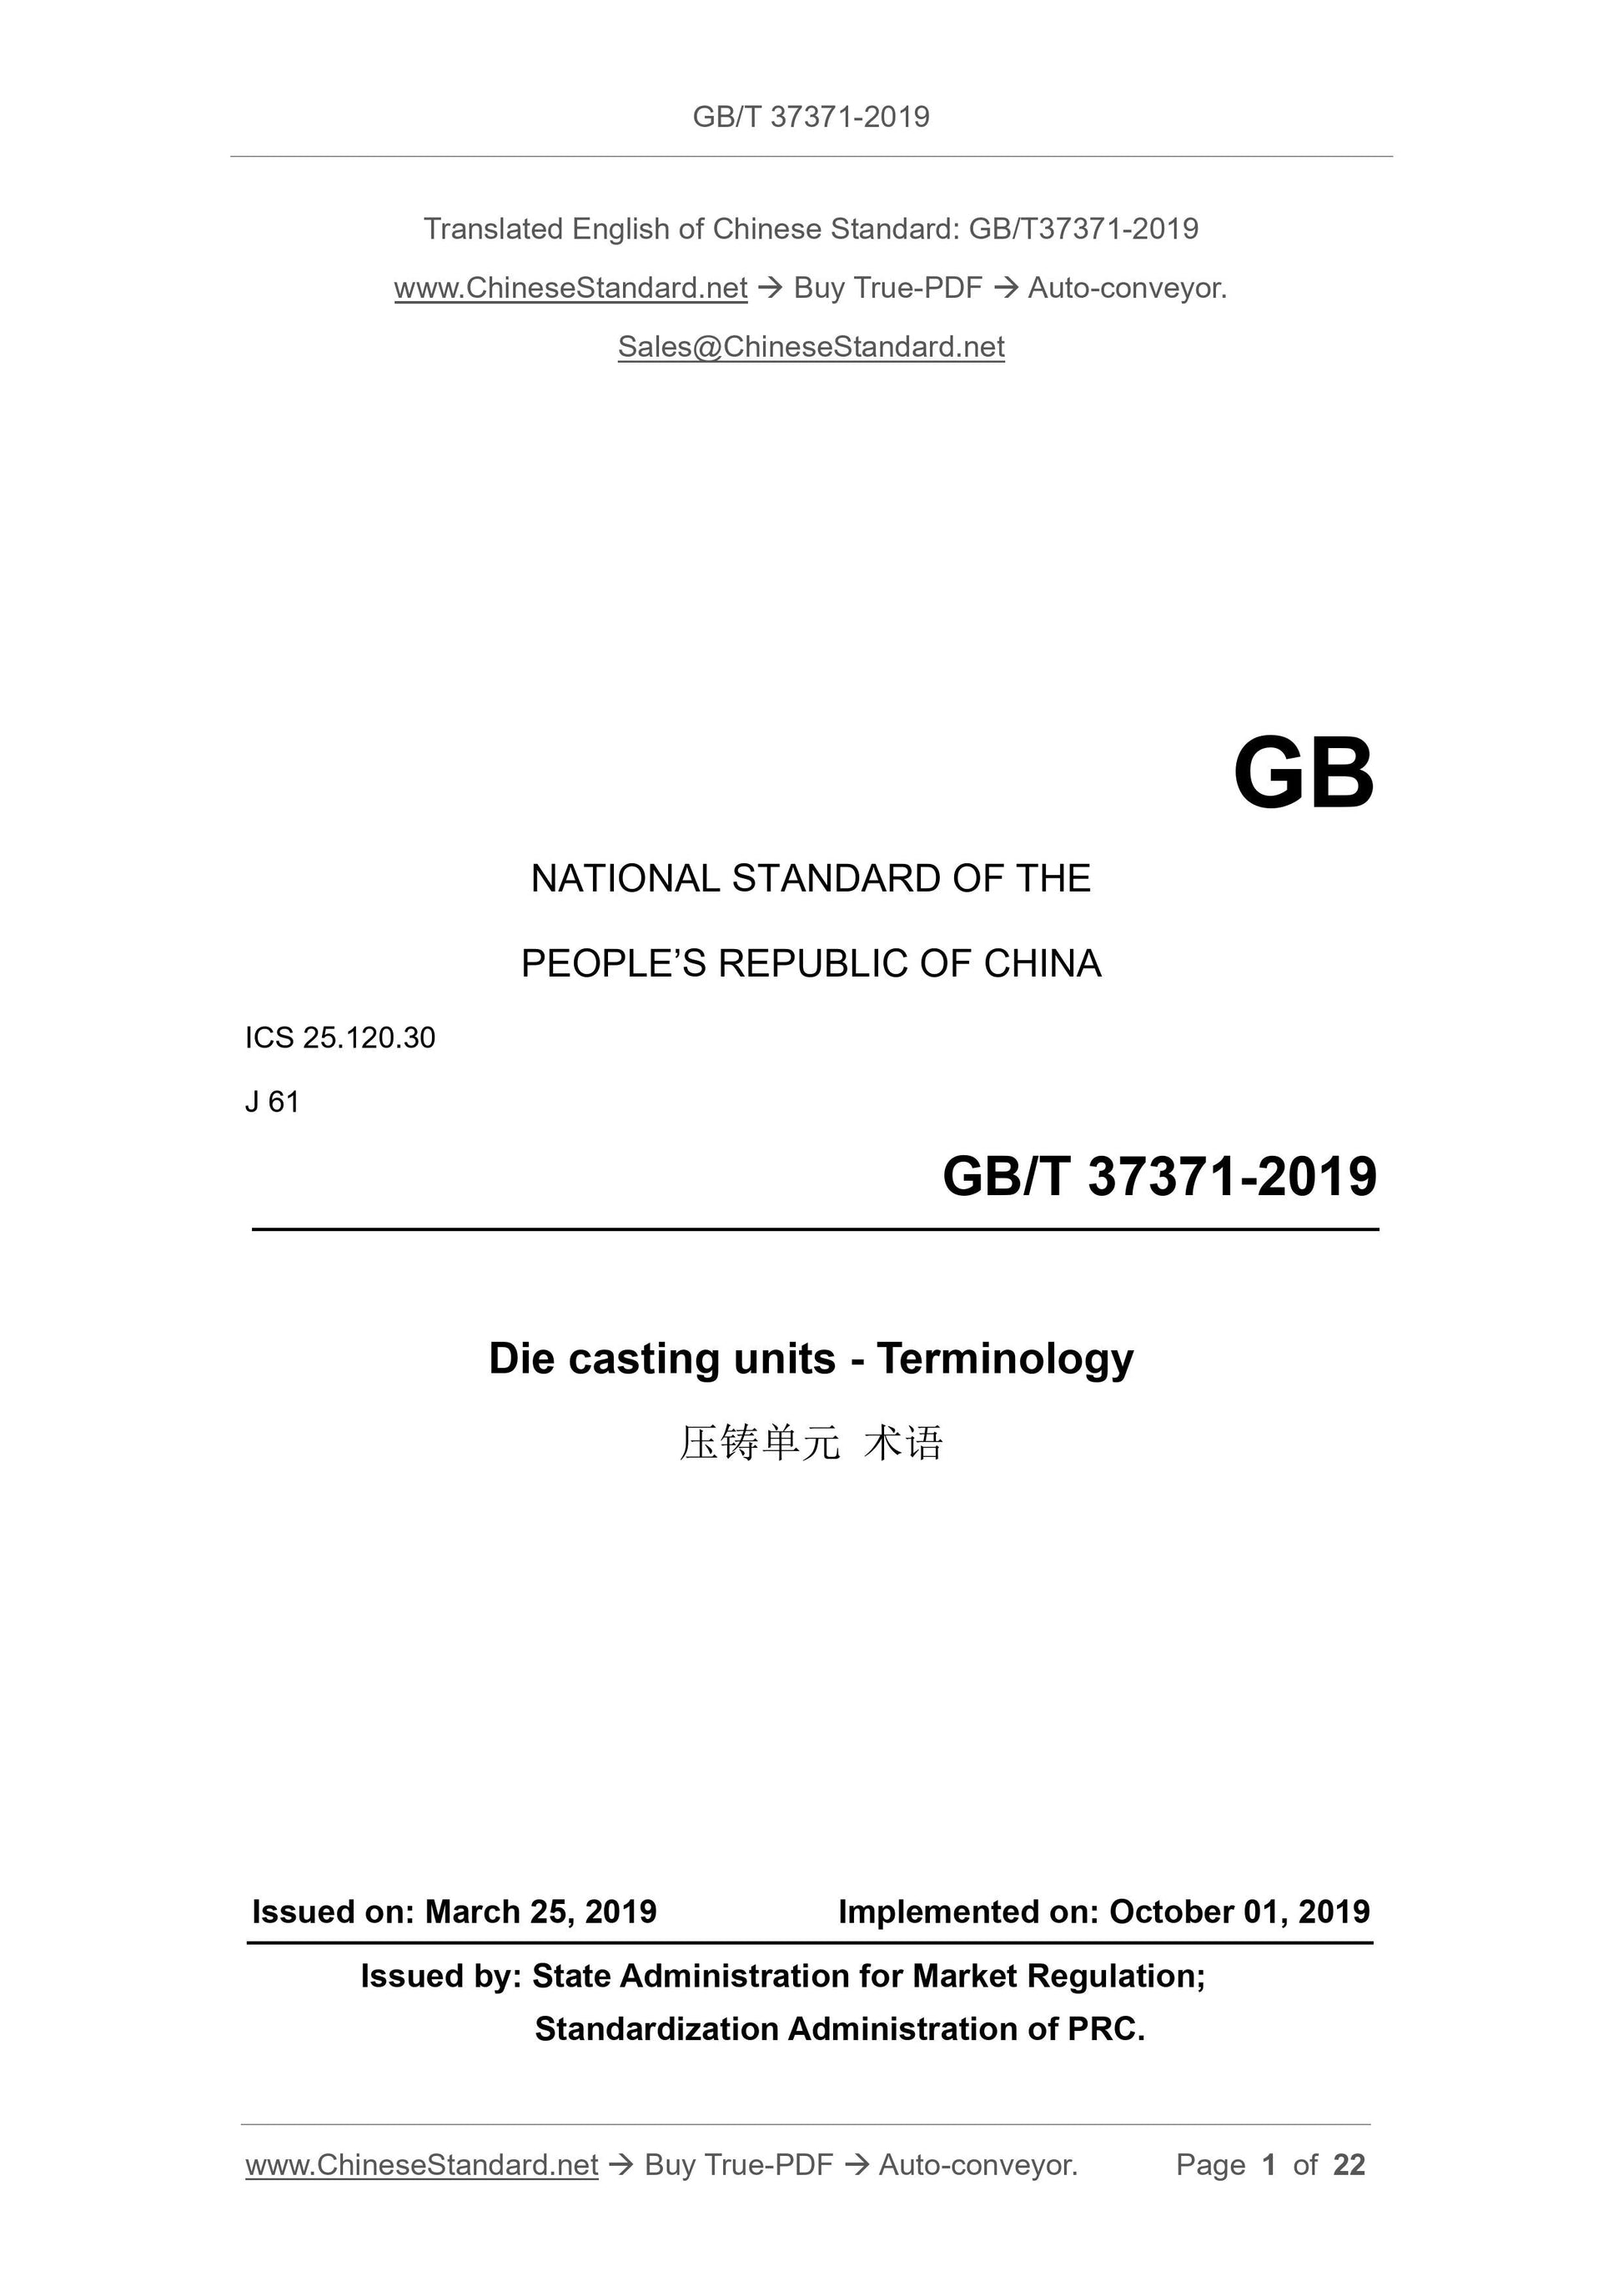 GB/T 37371-2019 Page 1